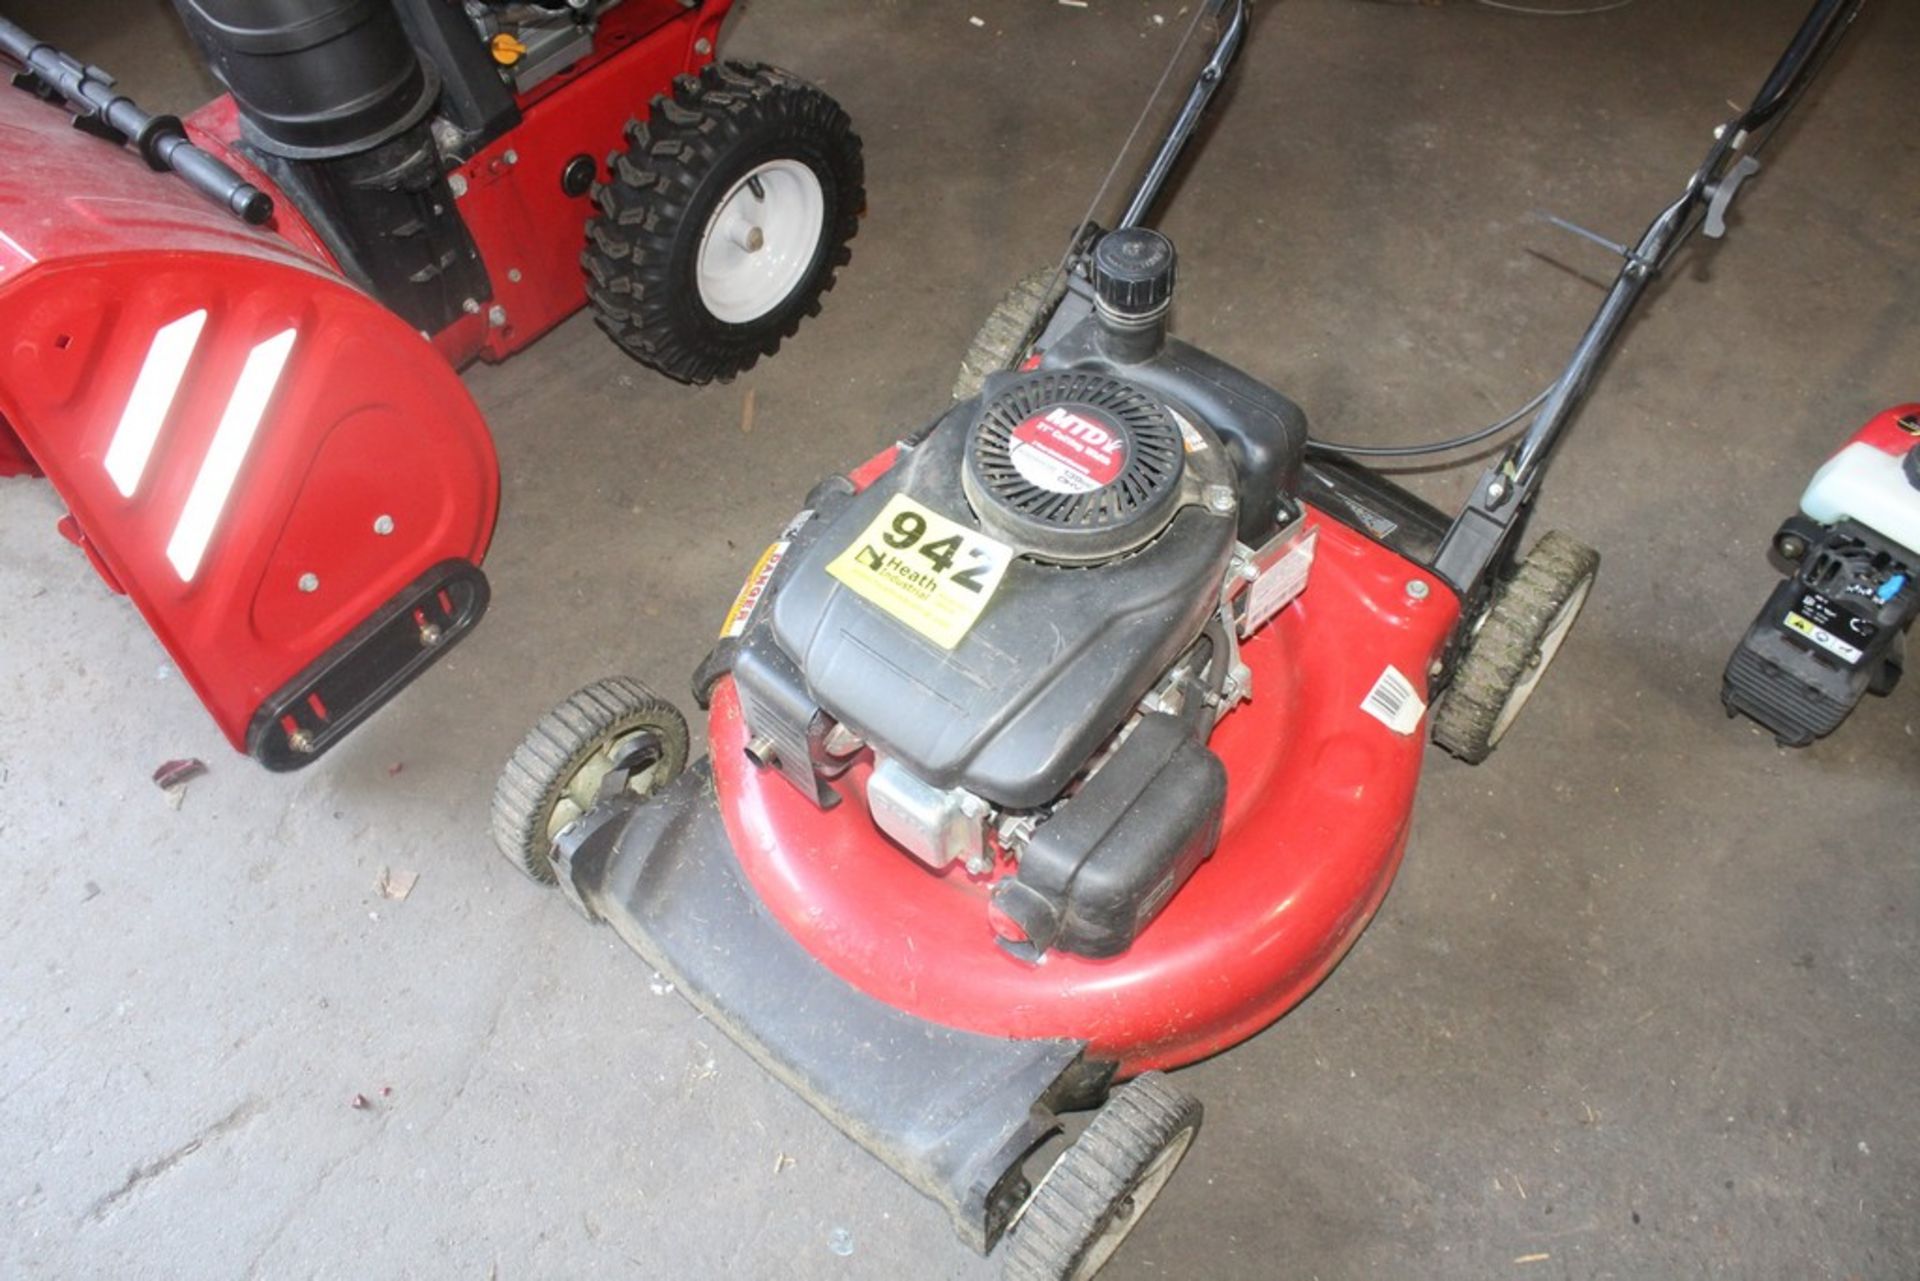 MTD 21" GAS PUSH MOWER WITH POWERMORE 139CC OHV ENGINE - Image 2 of 2